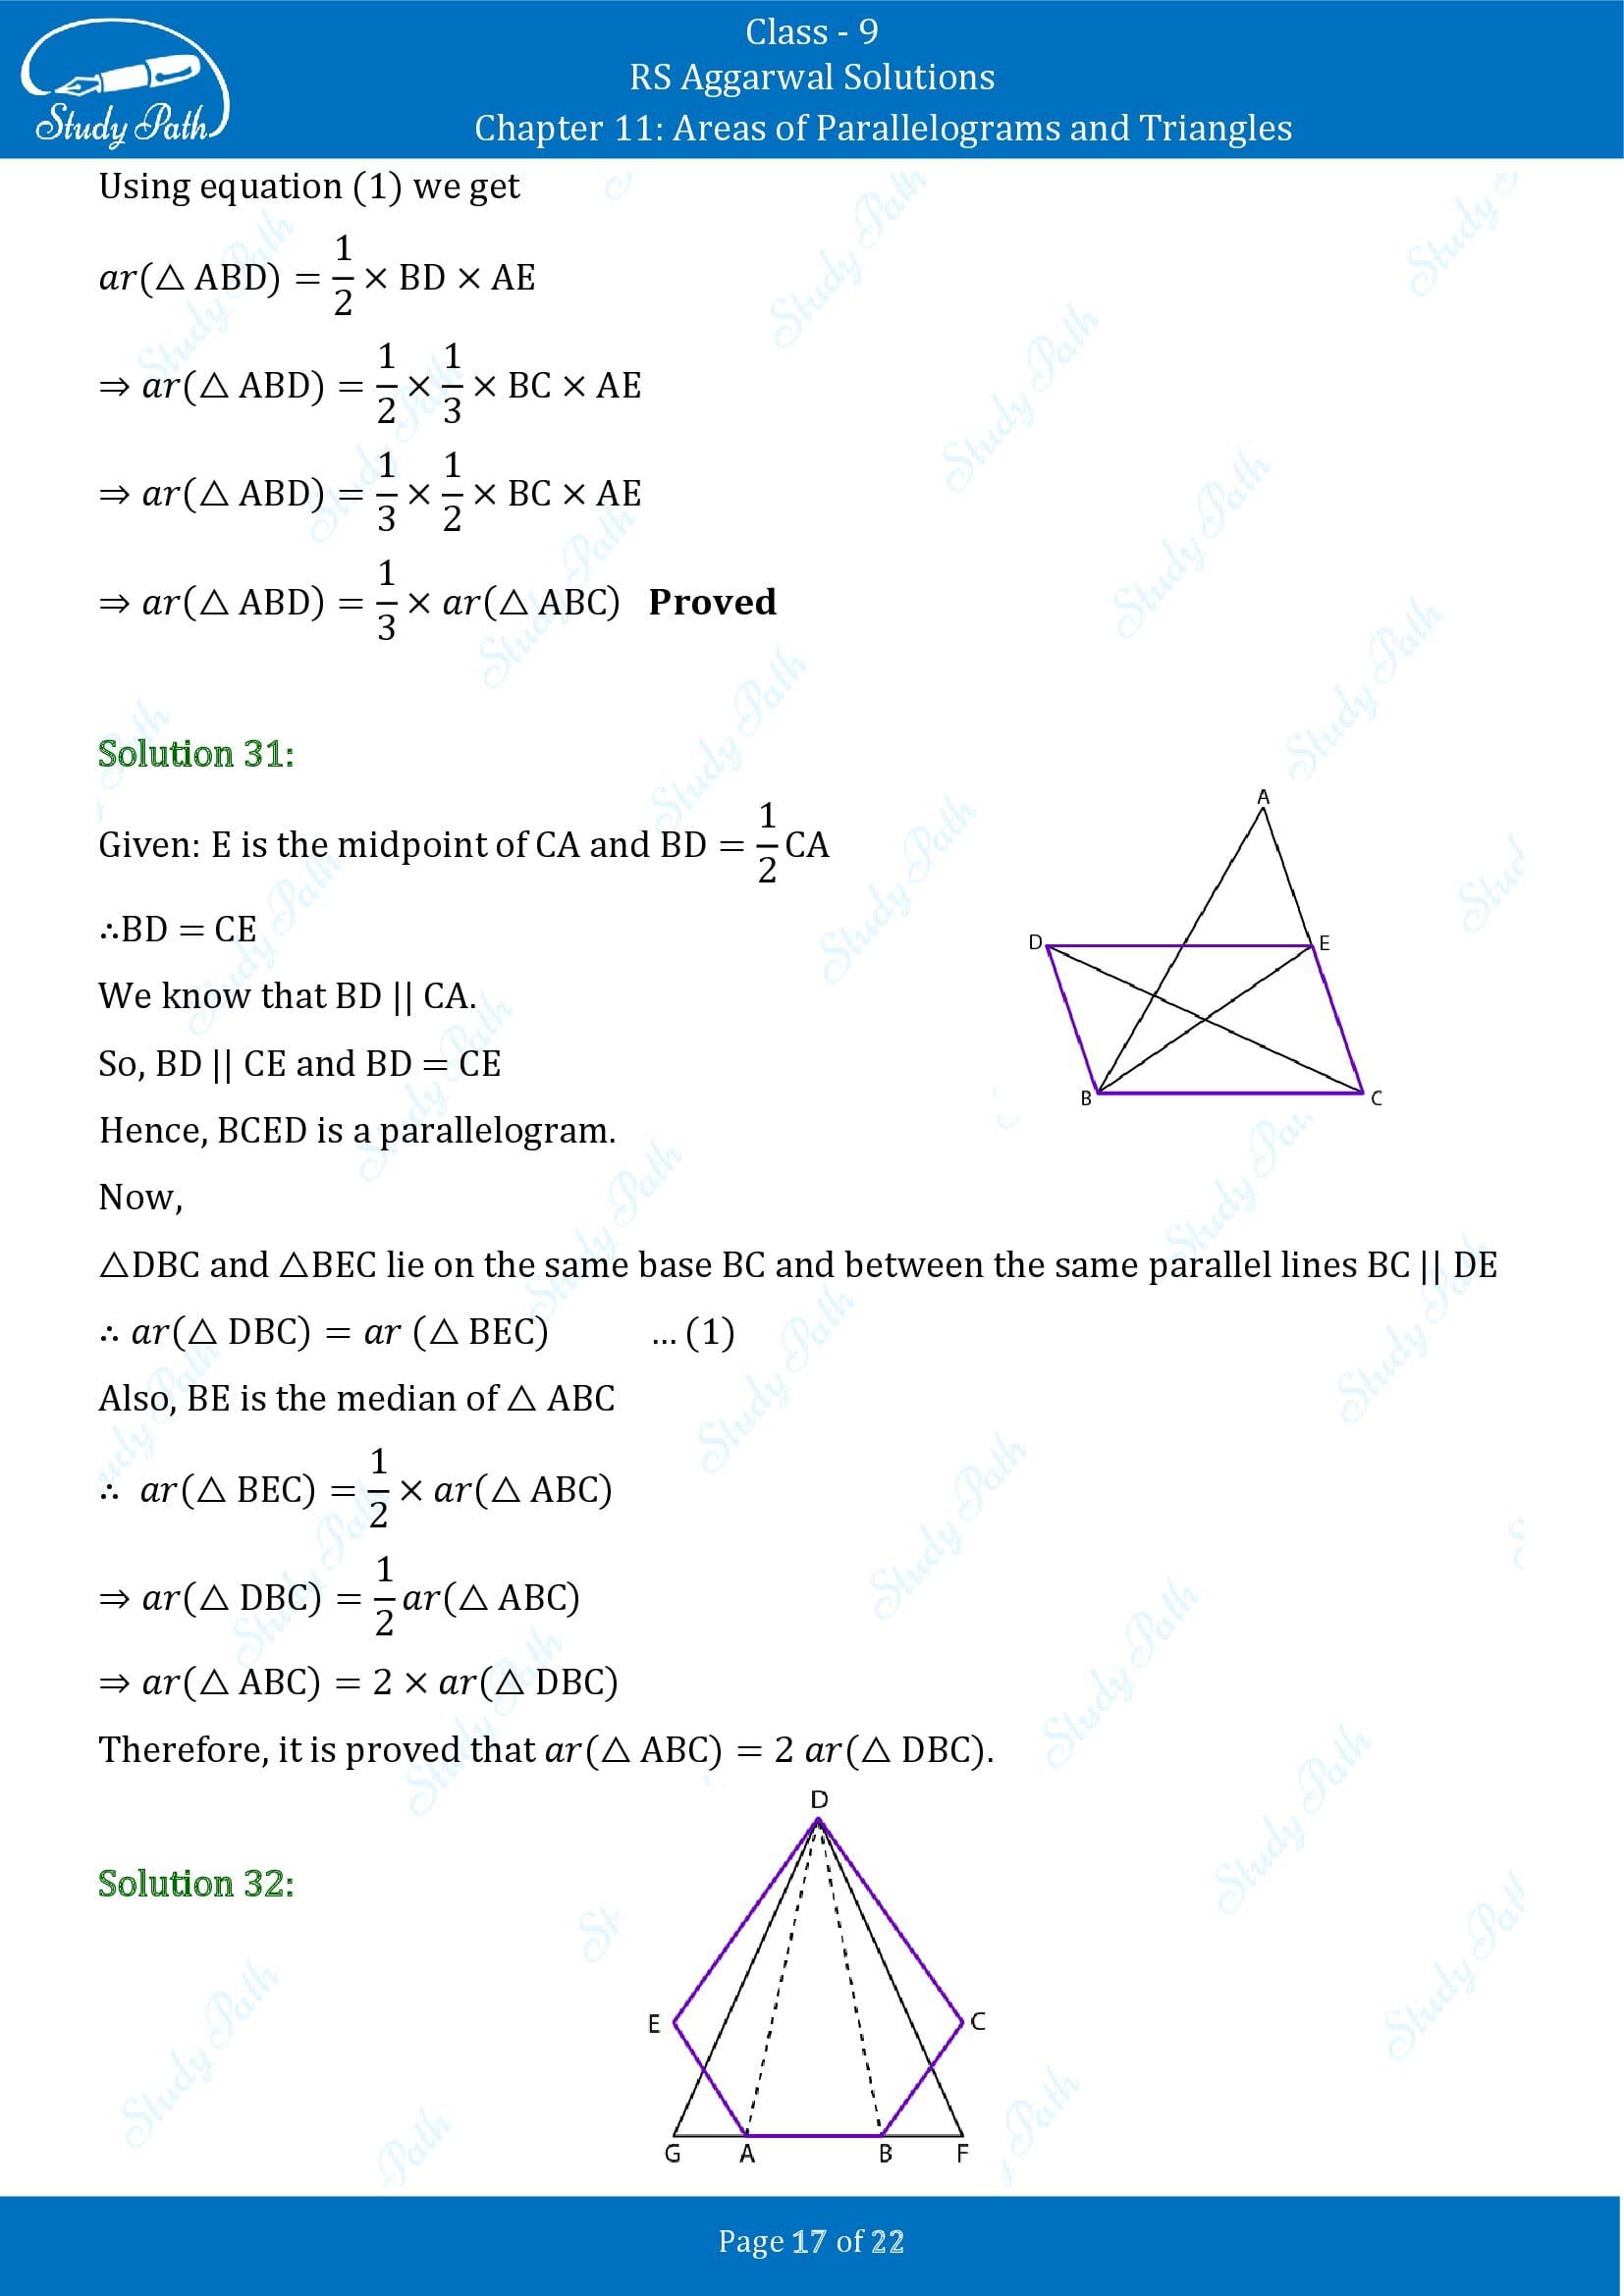 RS Aggarwal Solutions Class 9 Chapter 11 Areas of Parallelograms and Triangles Exercise 11 00017